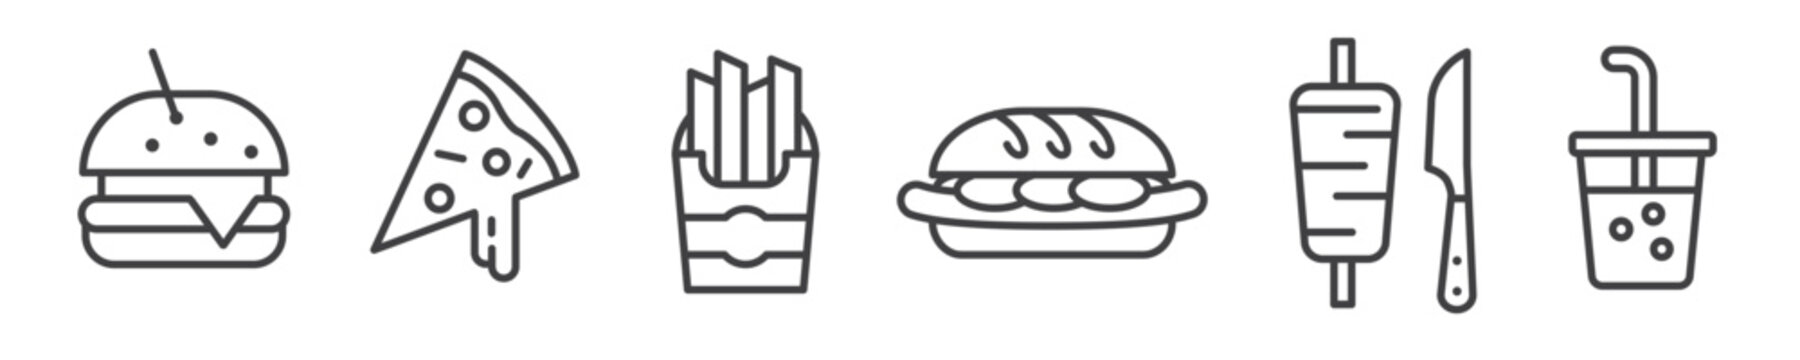 Fast food icons - Hamburger, Pizza, French fries and gyros vector line icons - thin line icon collection on white background